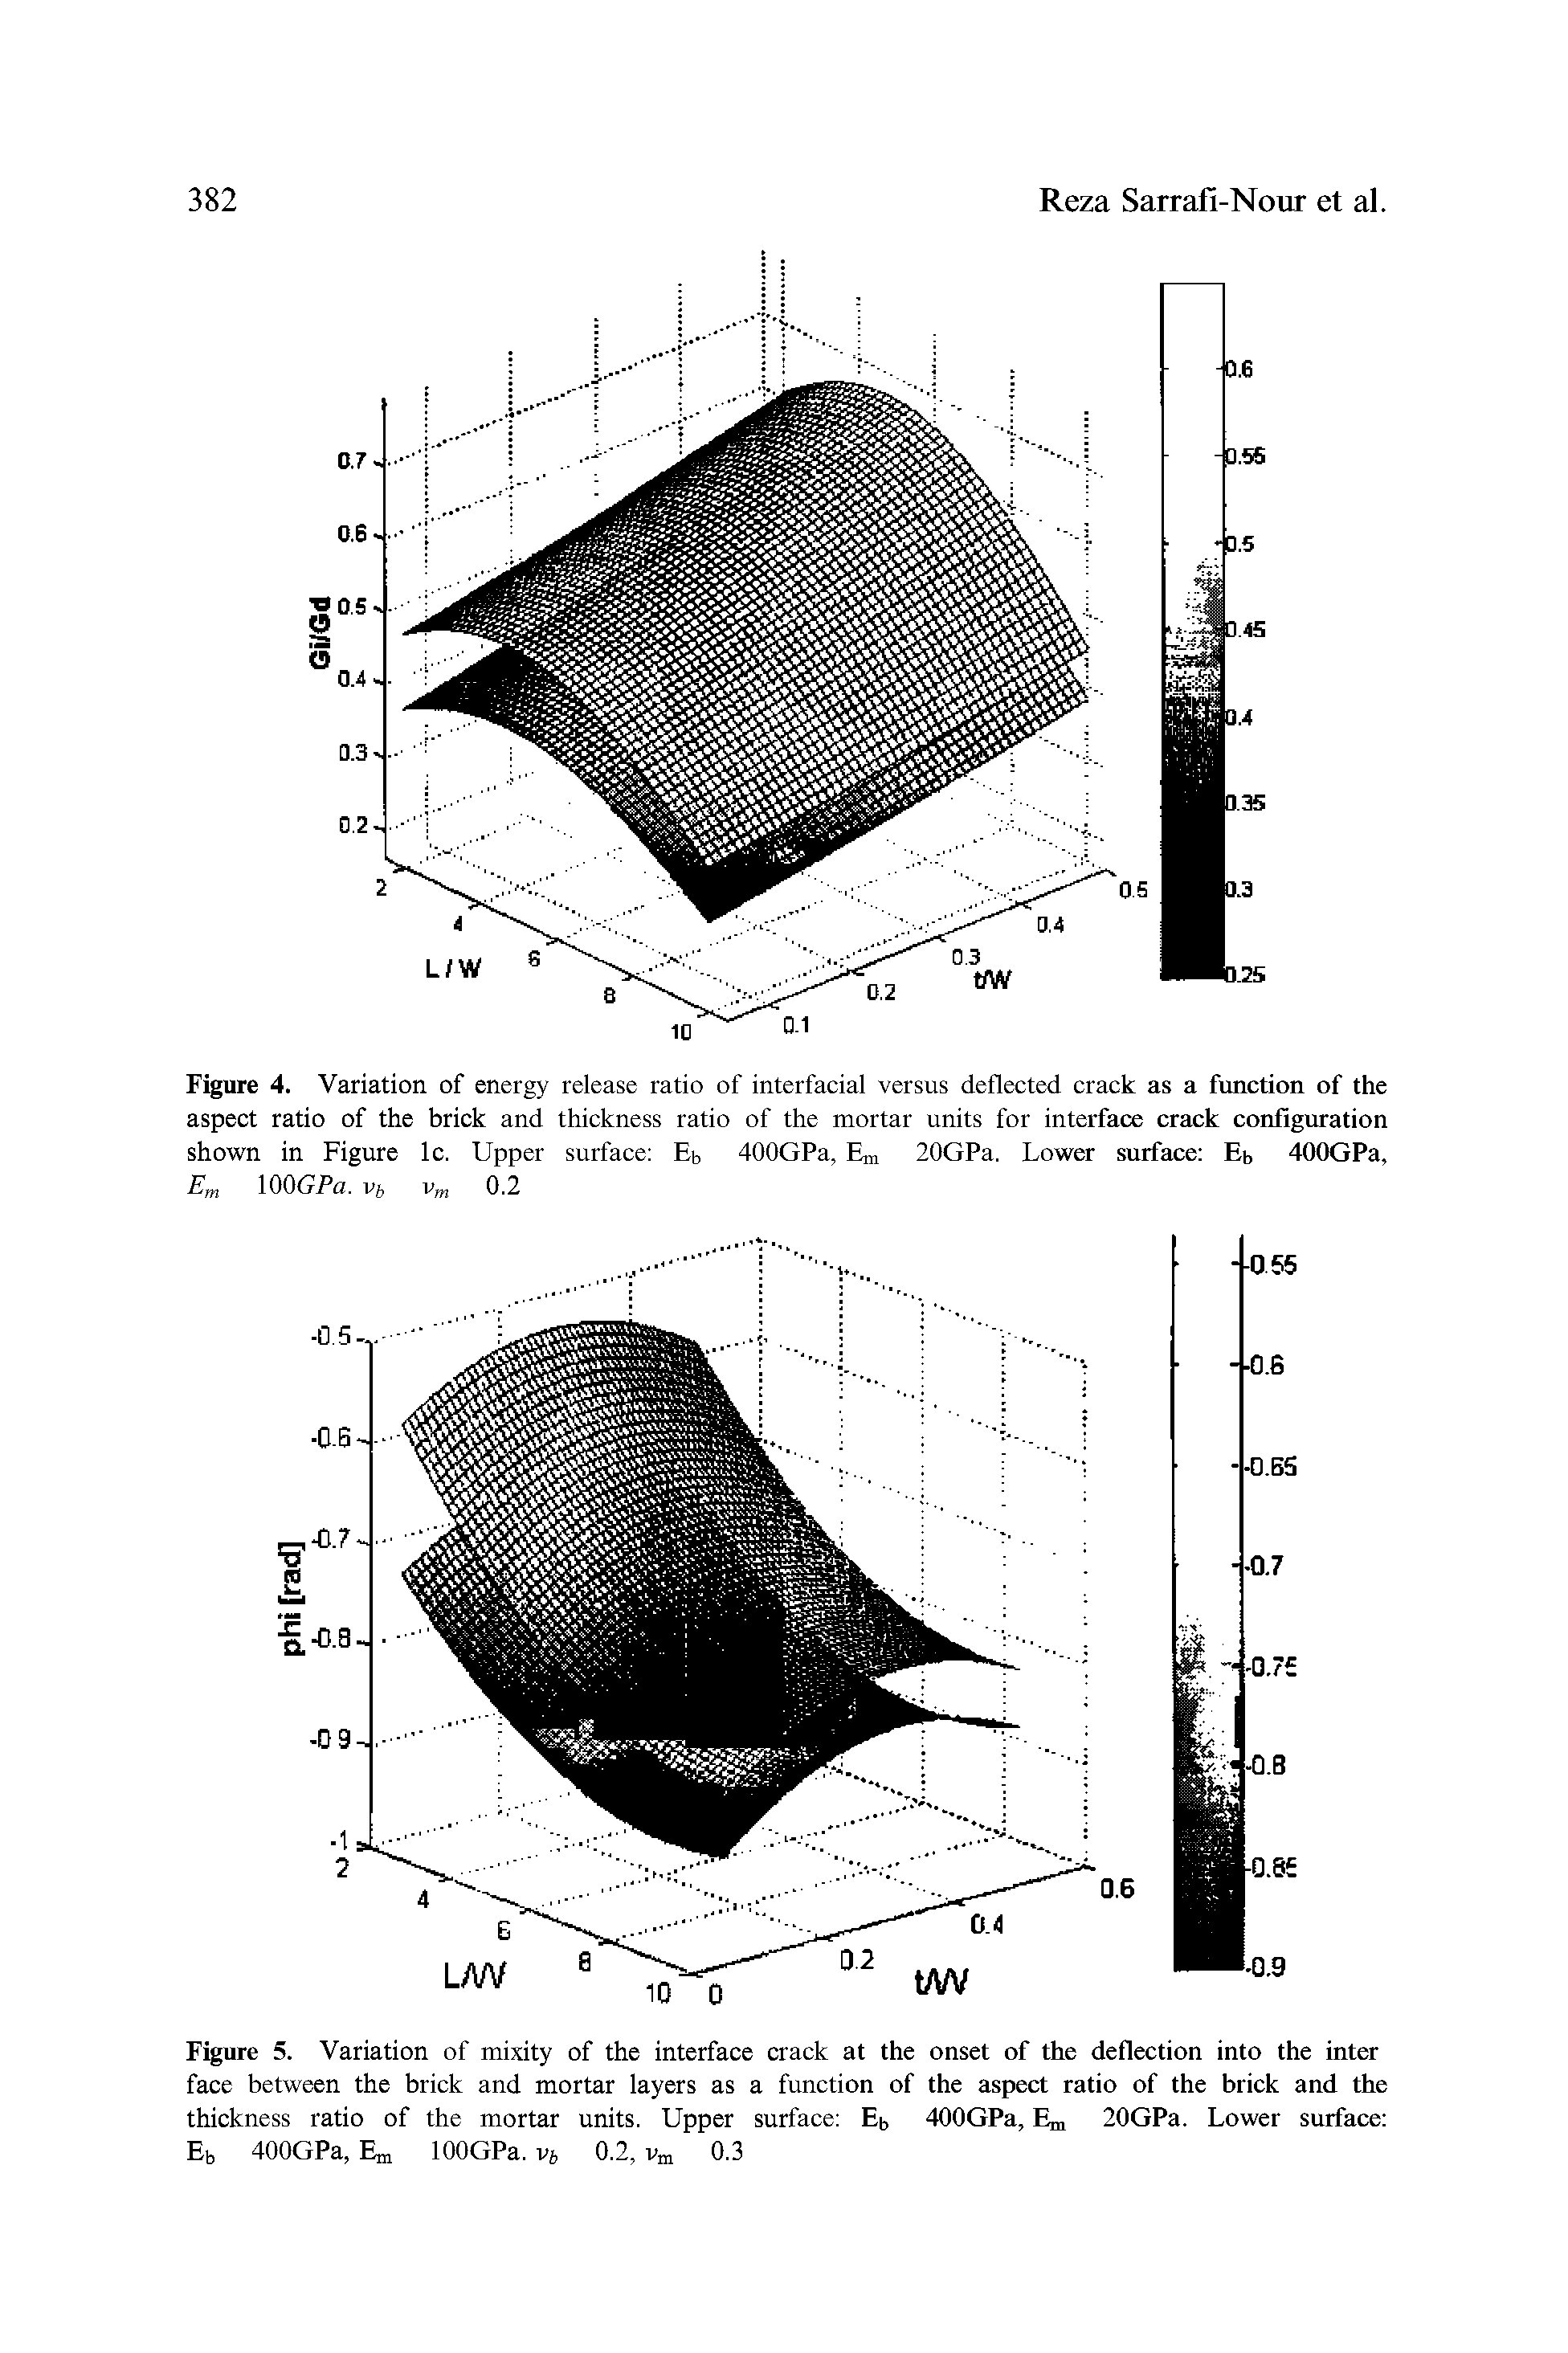 Figure 5. Variation of mixity of the interface crack at the onset of the deflection into the inter face between the brick and mortar layers as a function of the aspect ratio of the brick and the thickness ratio of the mortar units. Upper surface Eb 400GPa, Em 20GPa. Lower surface Eb 400GPa, Em lOOGPa. vj 0.2, Vm 0.3...